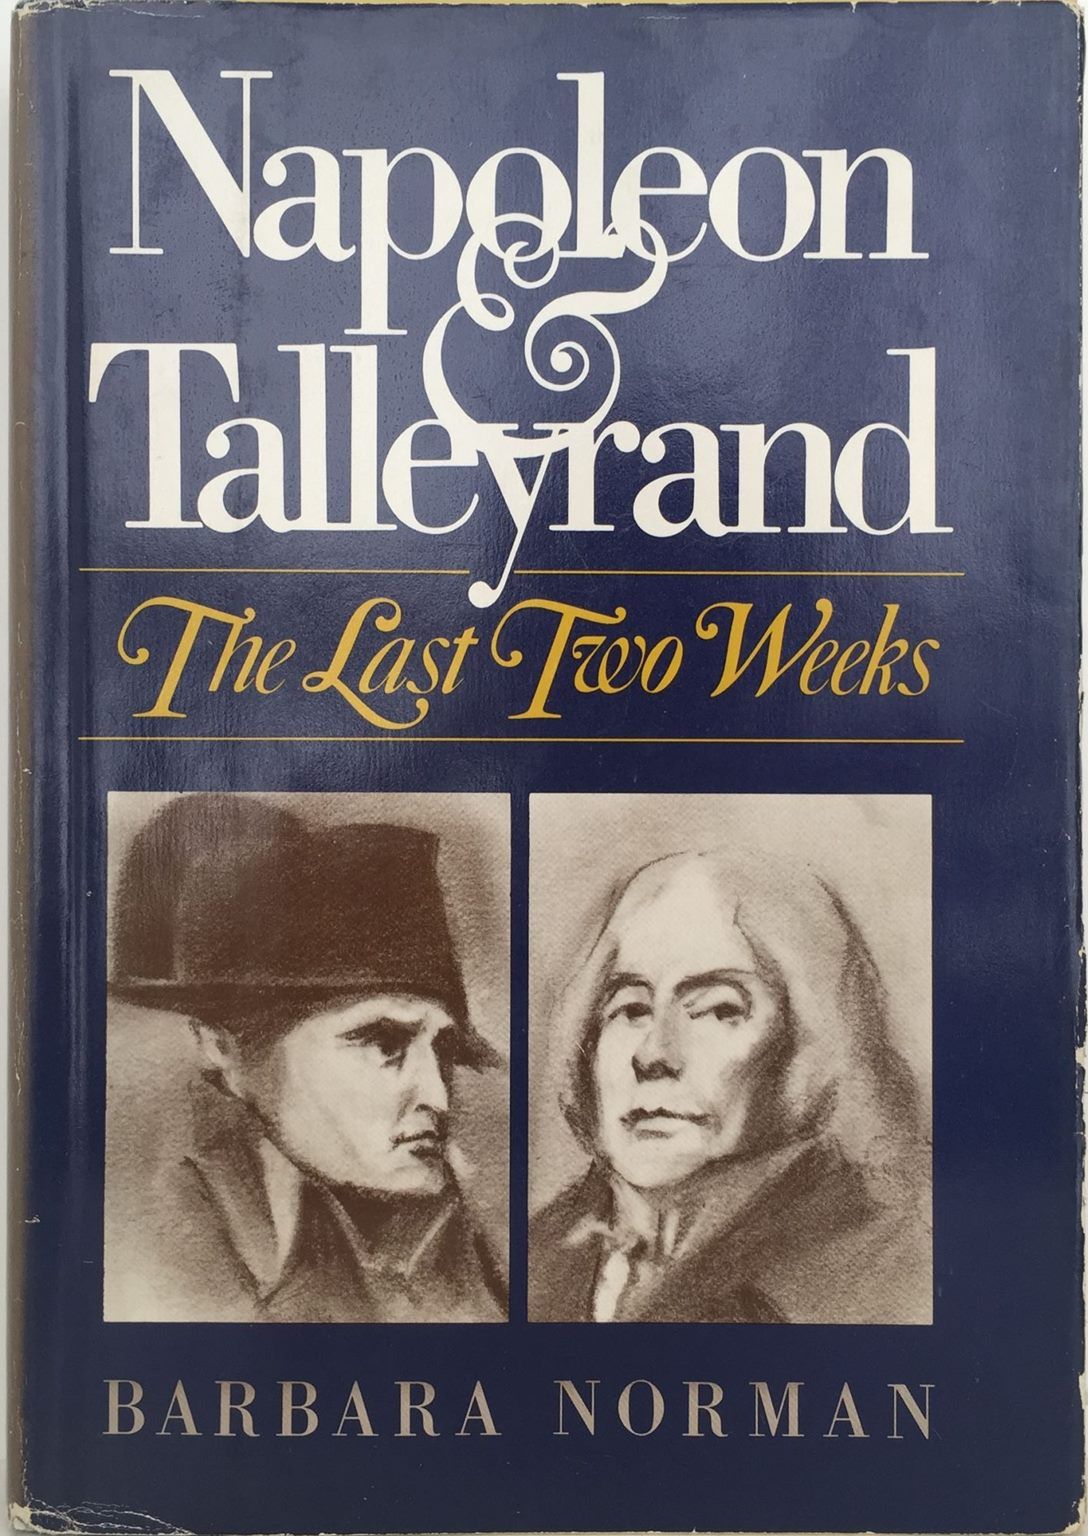 NAPOLEON AND TALLEYRAND: The Last Two Weeks